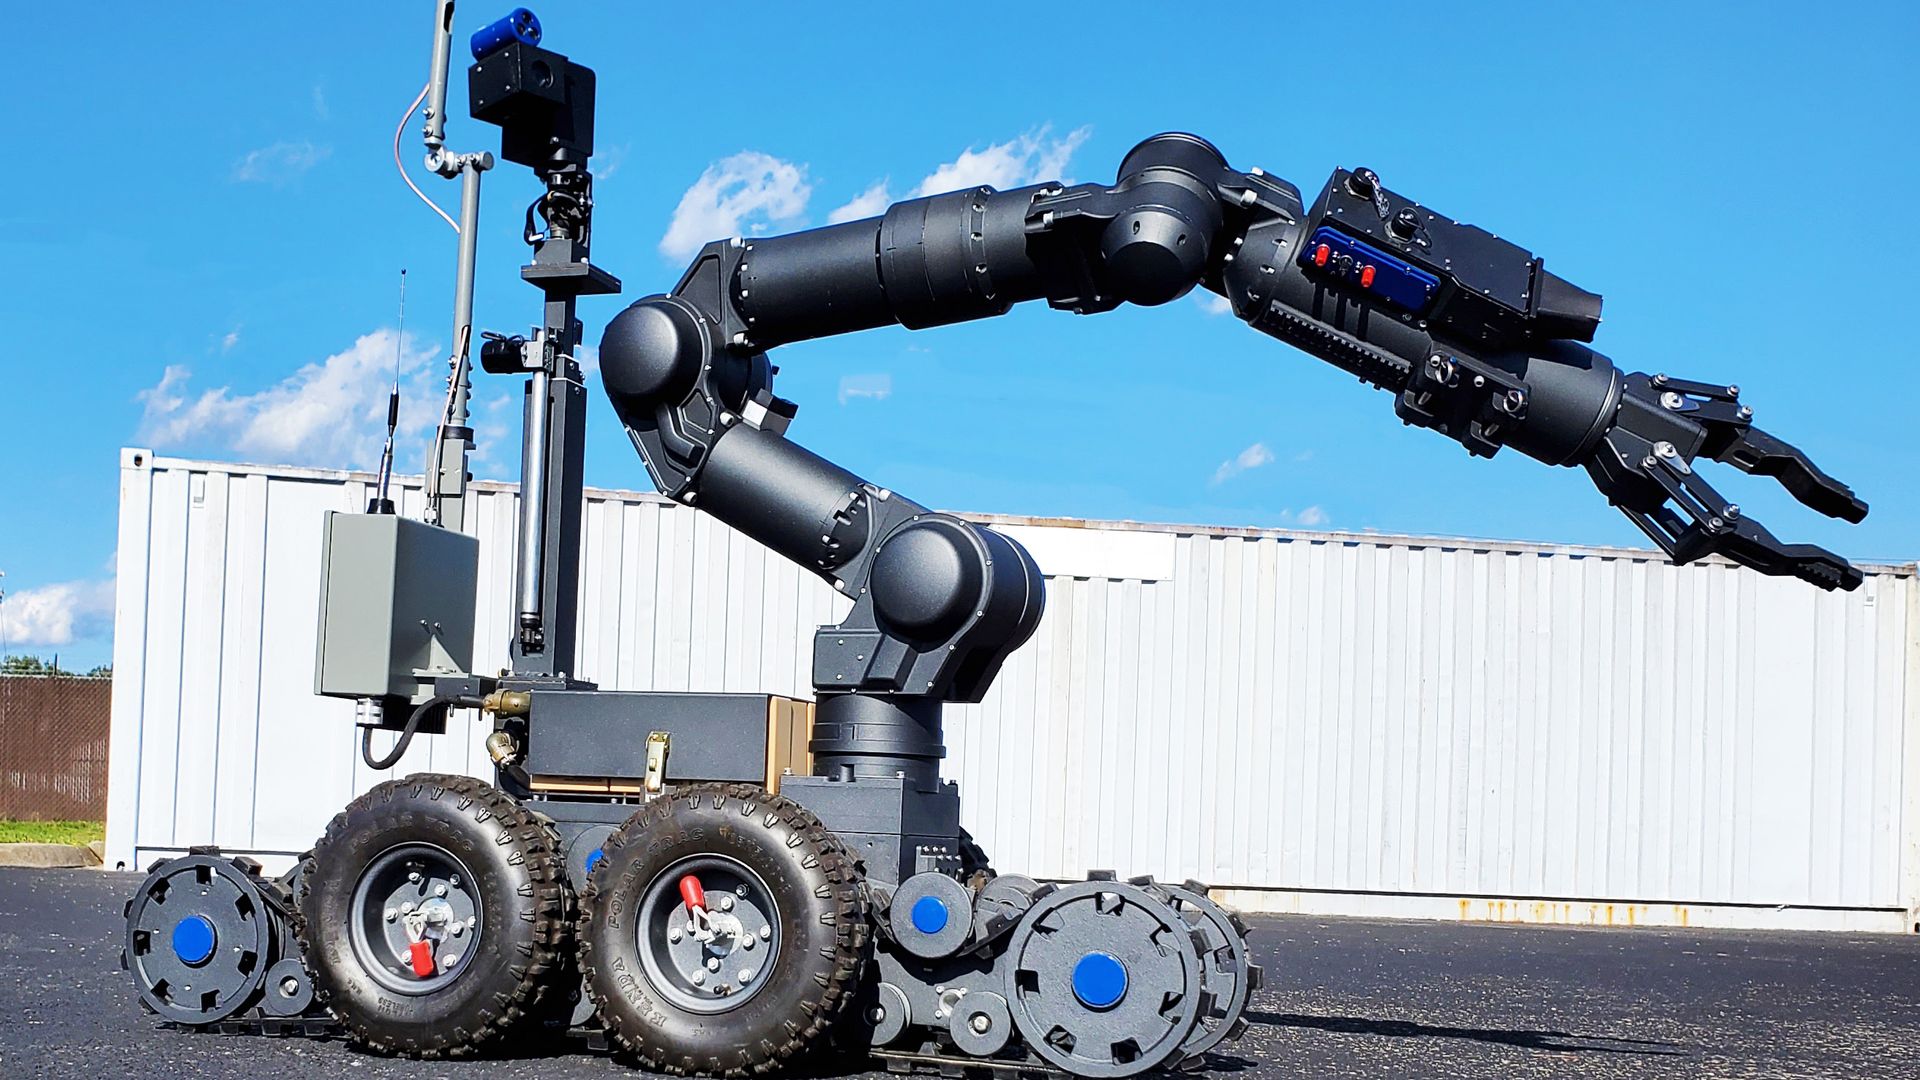 Bomb robot with an articulating arm